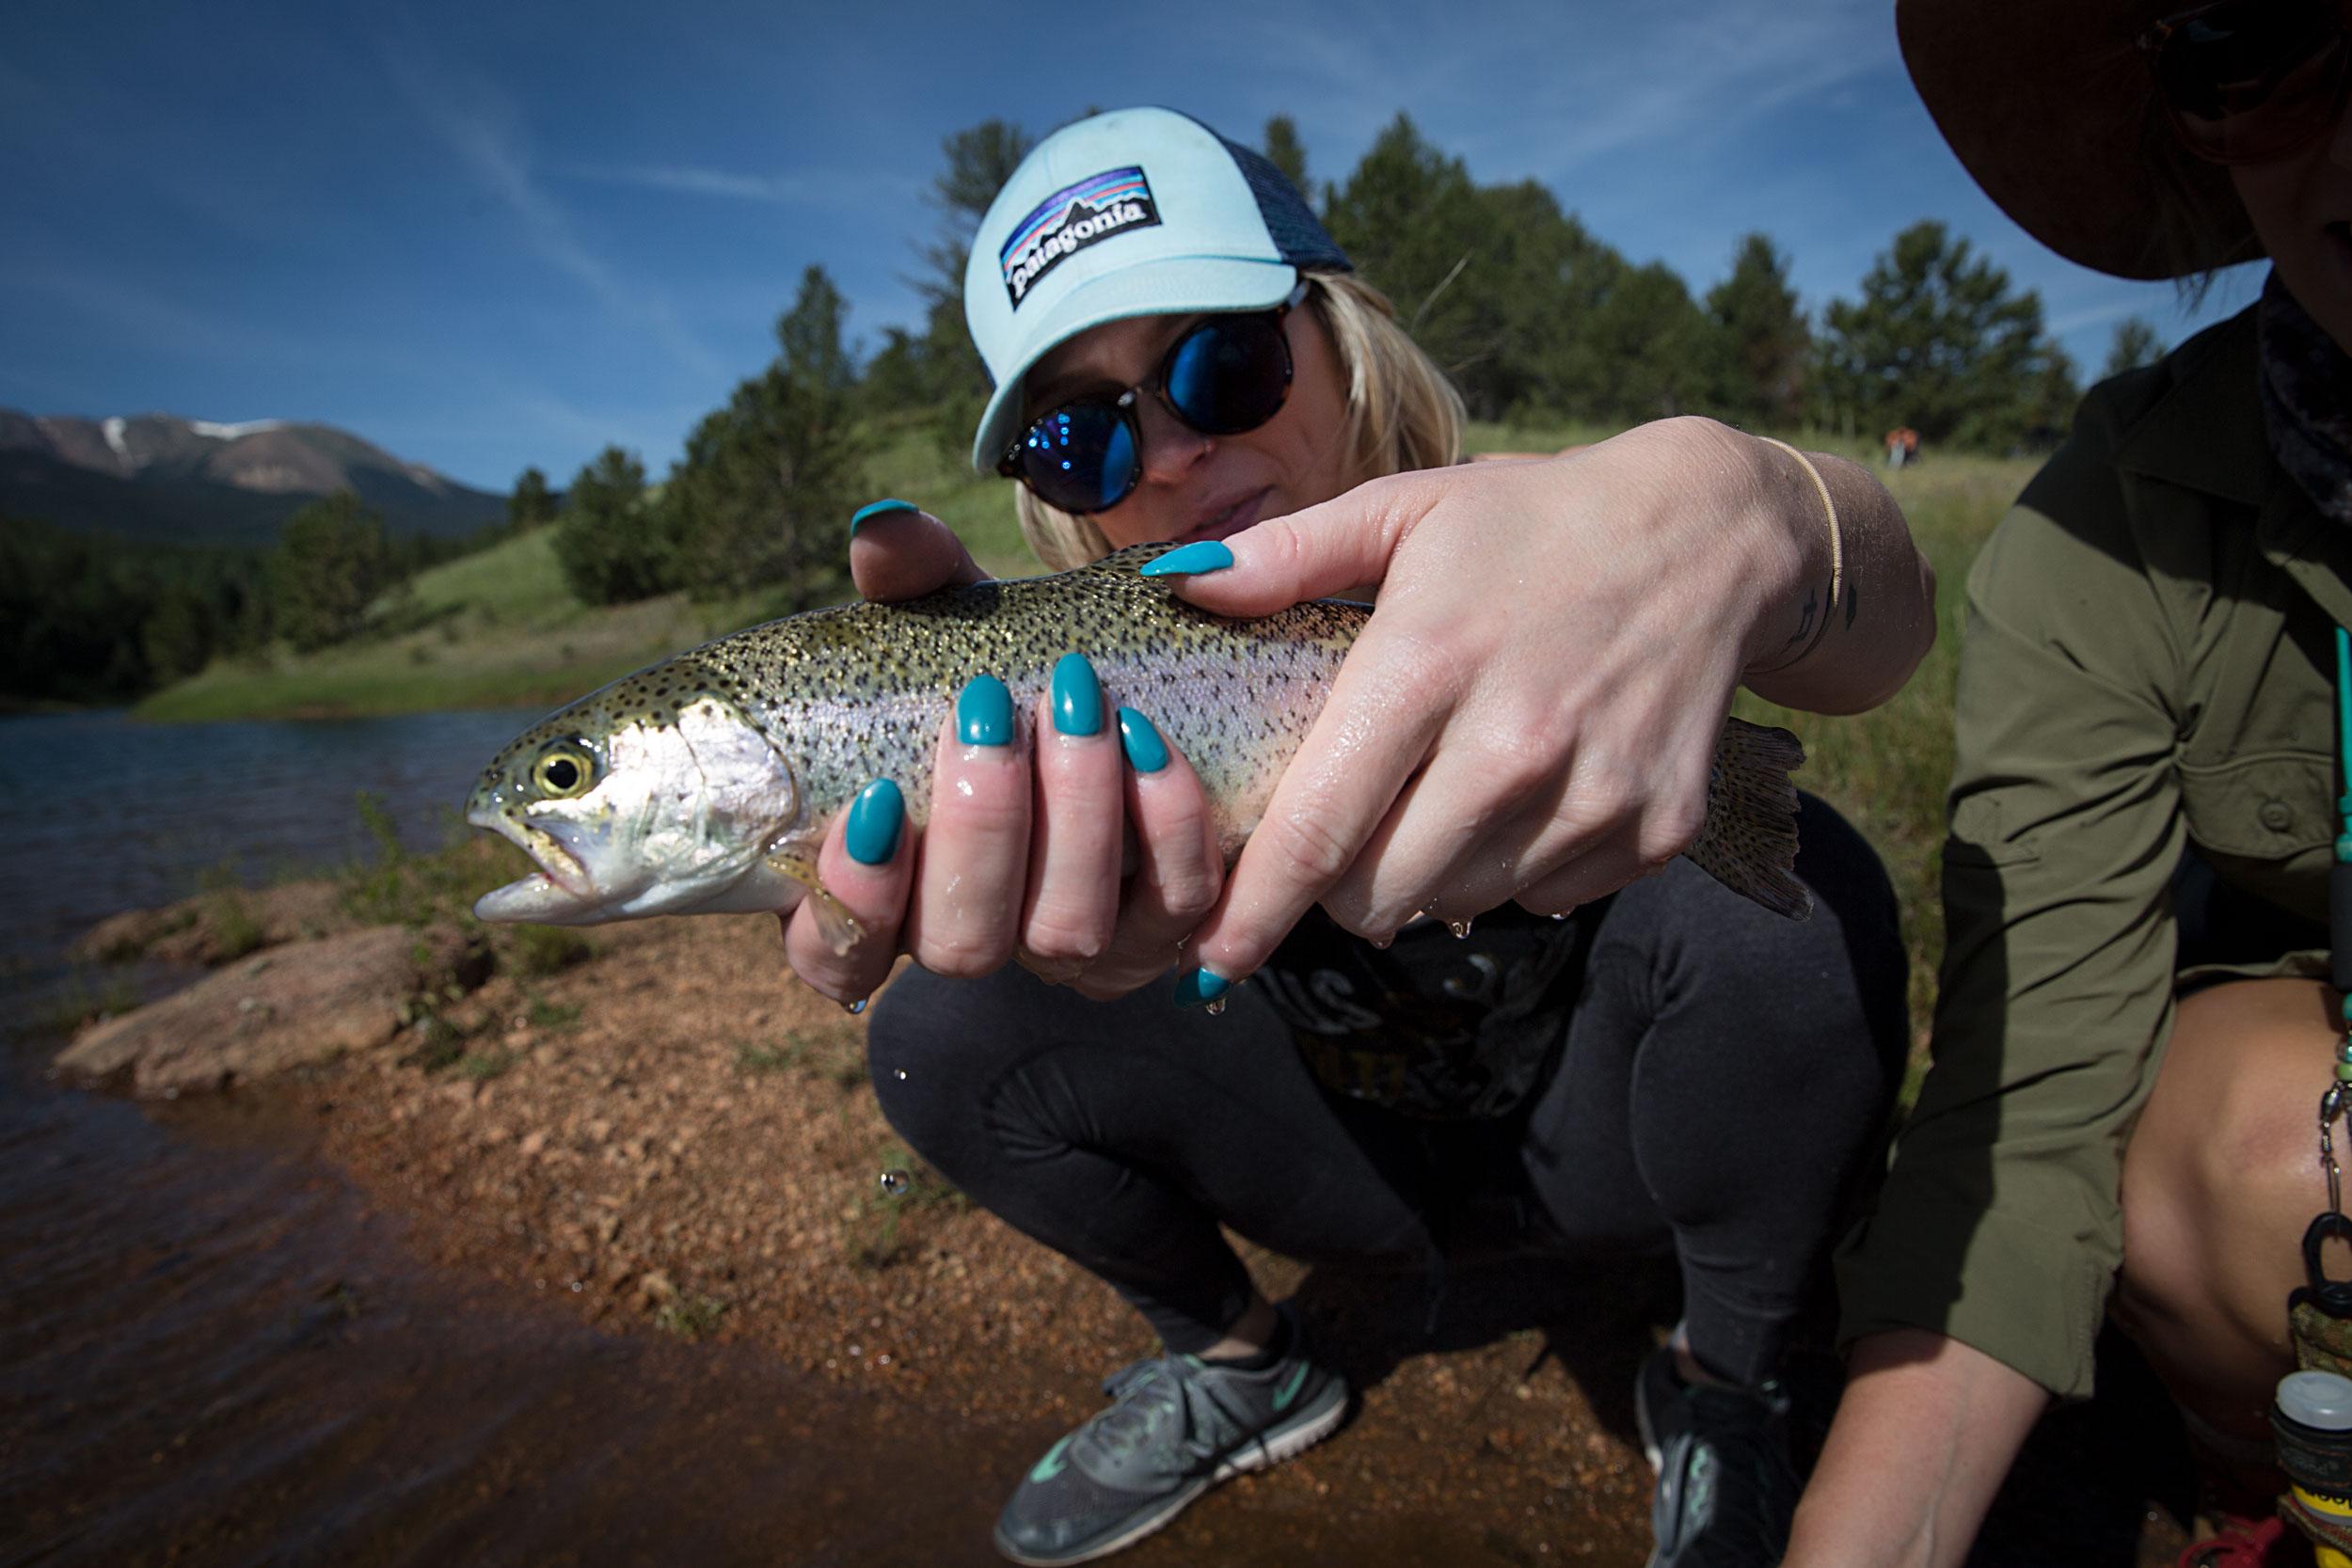 How Do You Hook More Women On Fly-Fishing? Get More Women Guides